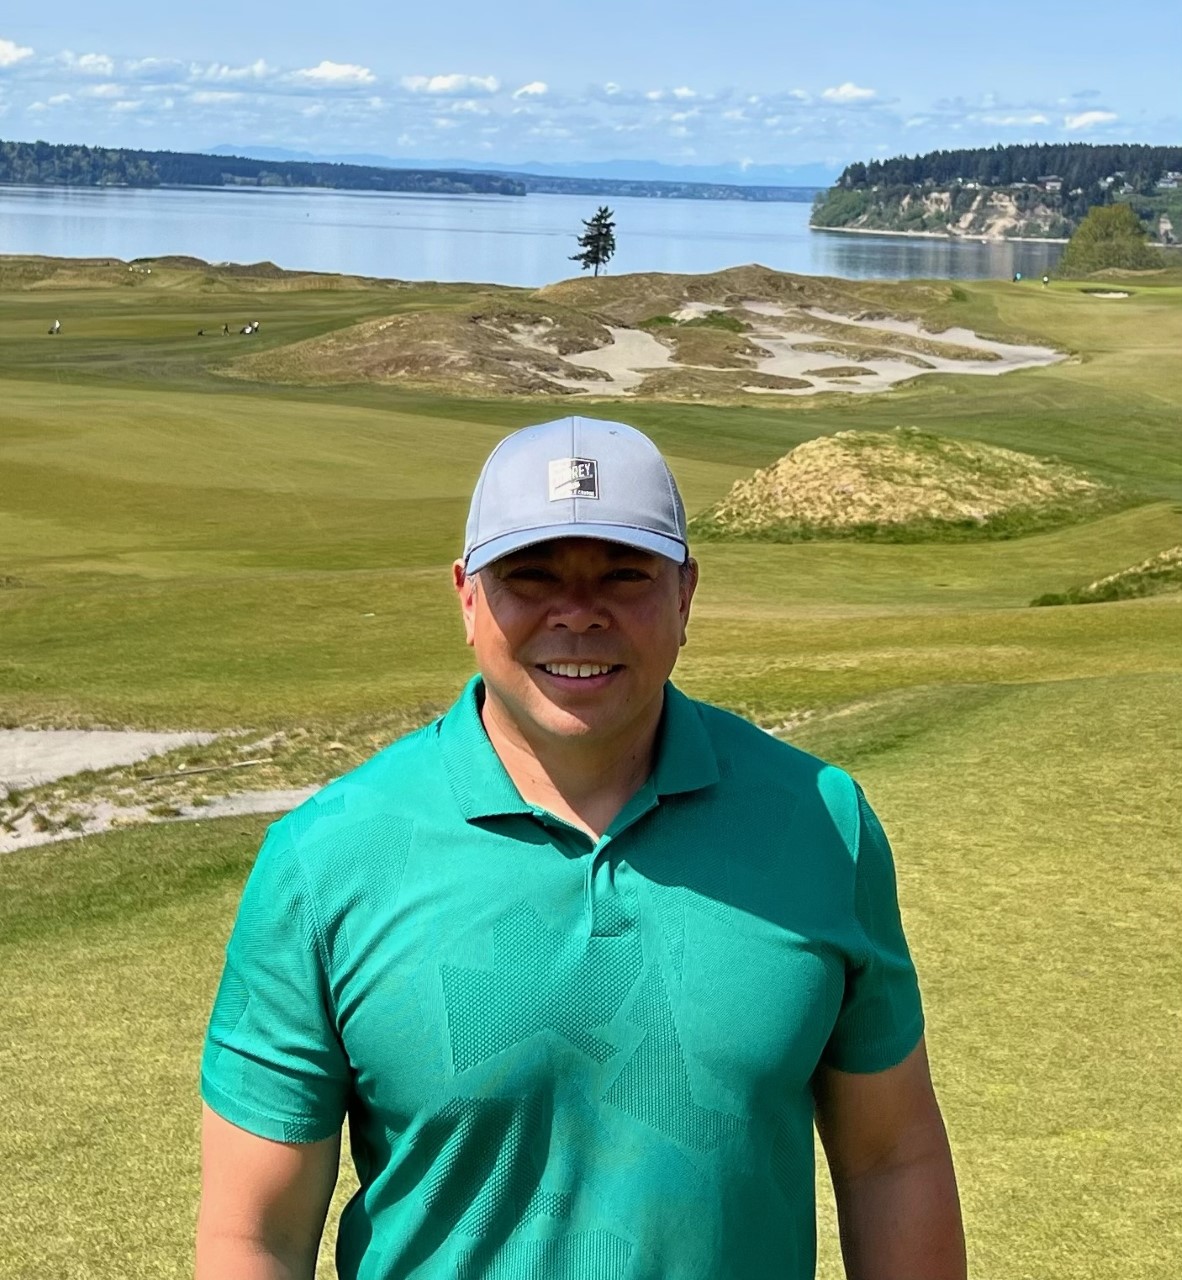 Smiling man in green shirt at Golf course with an ocean view behind him